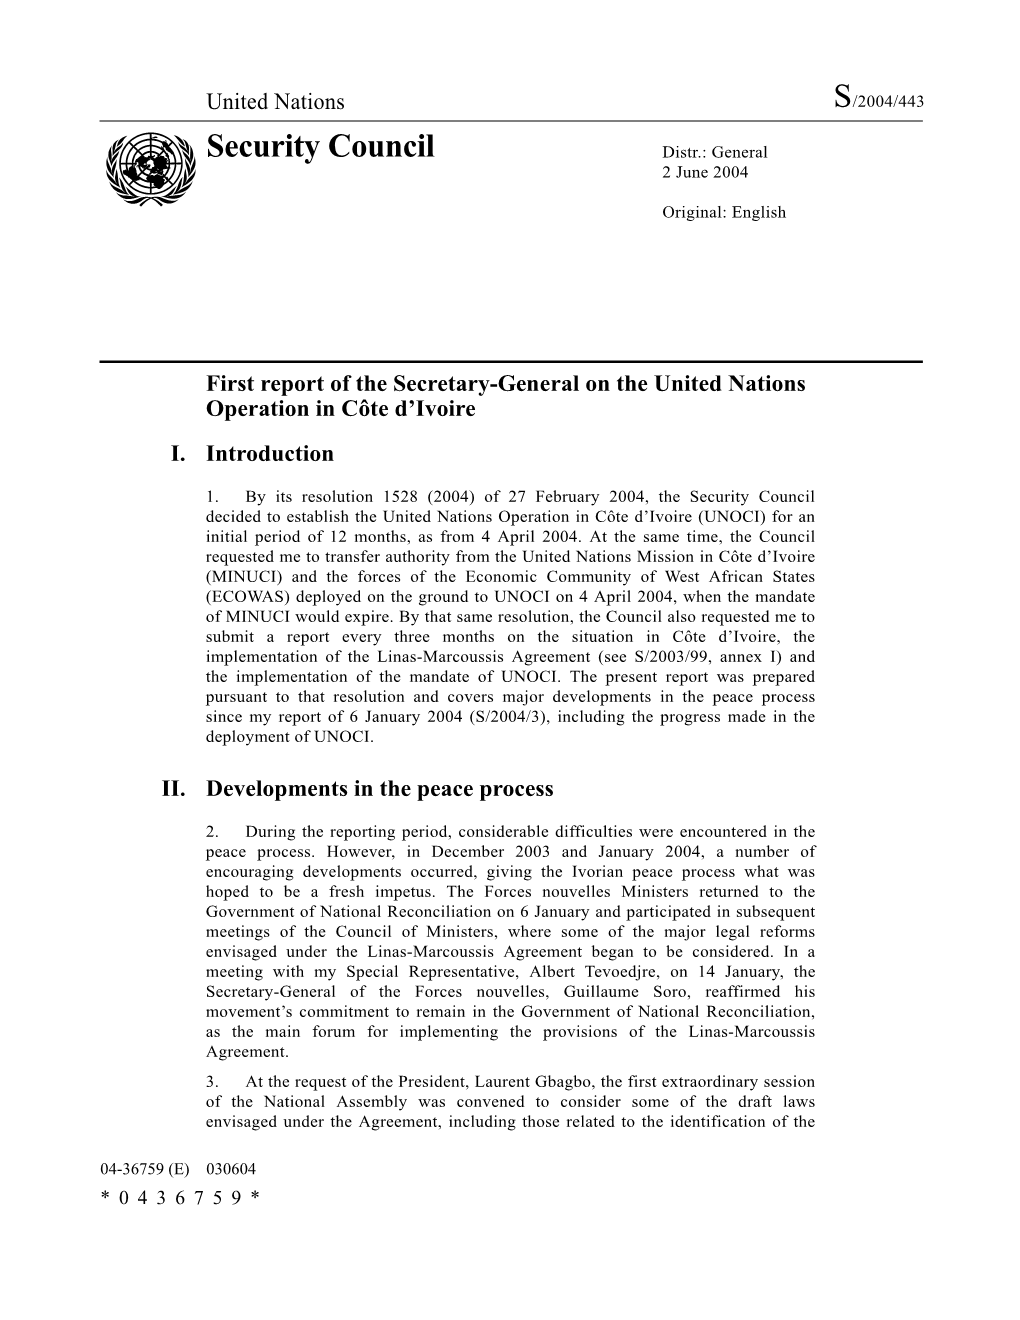 First Report of the Secretary-General on the United Nations Operation in Côte D’Ivoire I